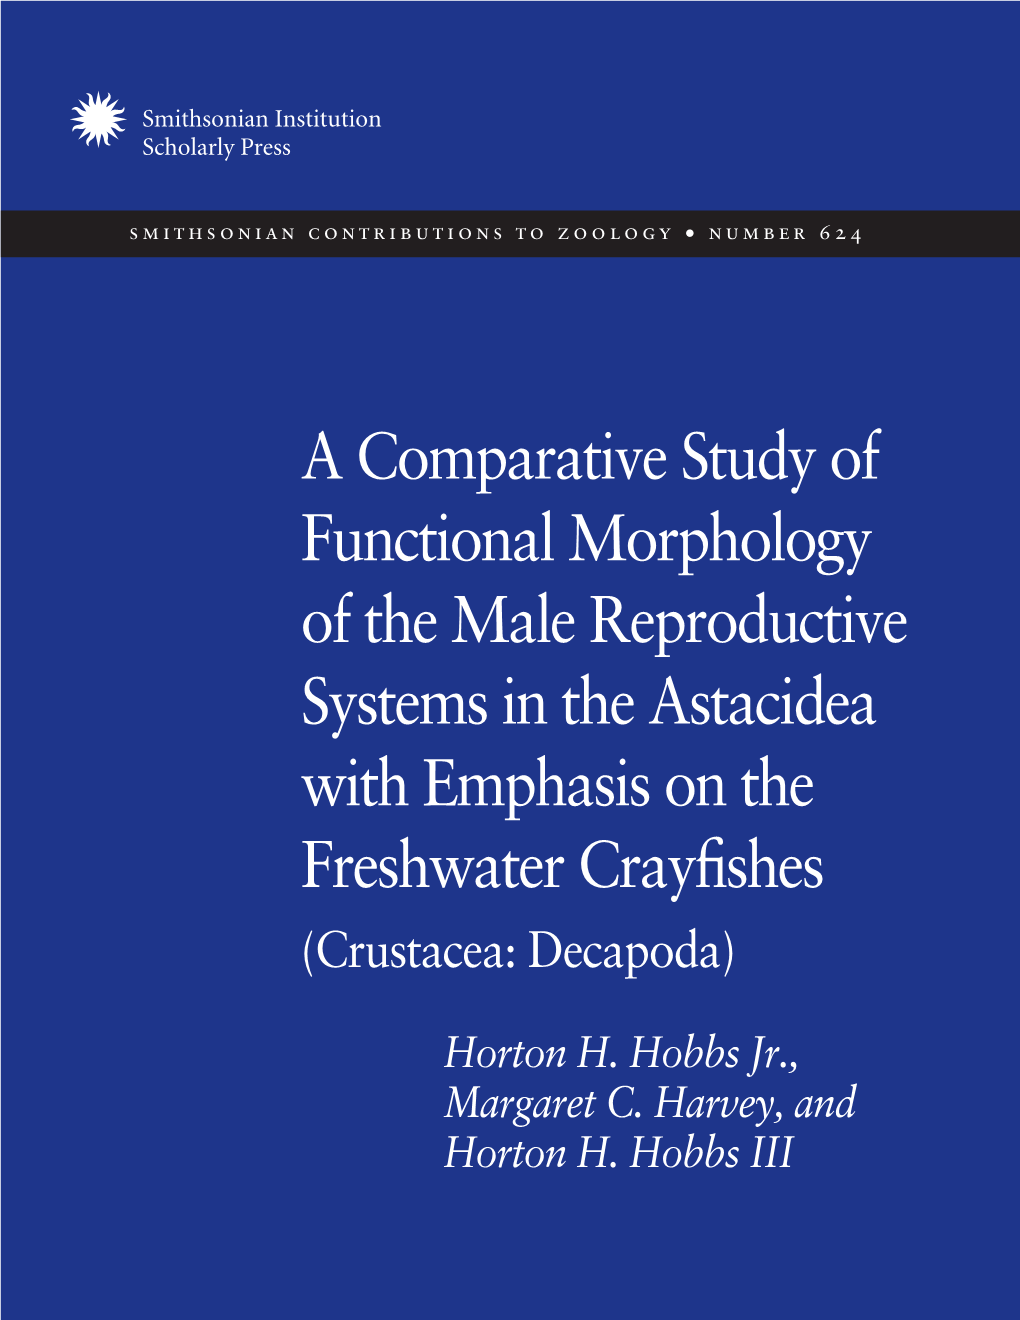 A Comparative Study of Functional Morphology of the Male Reproductive Systems in the Astacidea with Emphasis on the Freshwater Crayﬁ Shes (Crustacea: Decapoda)